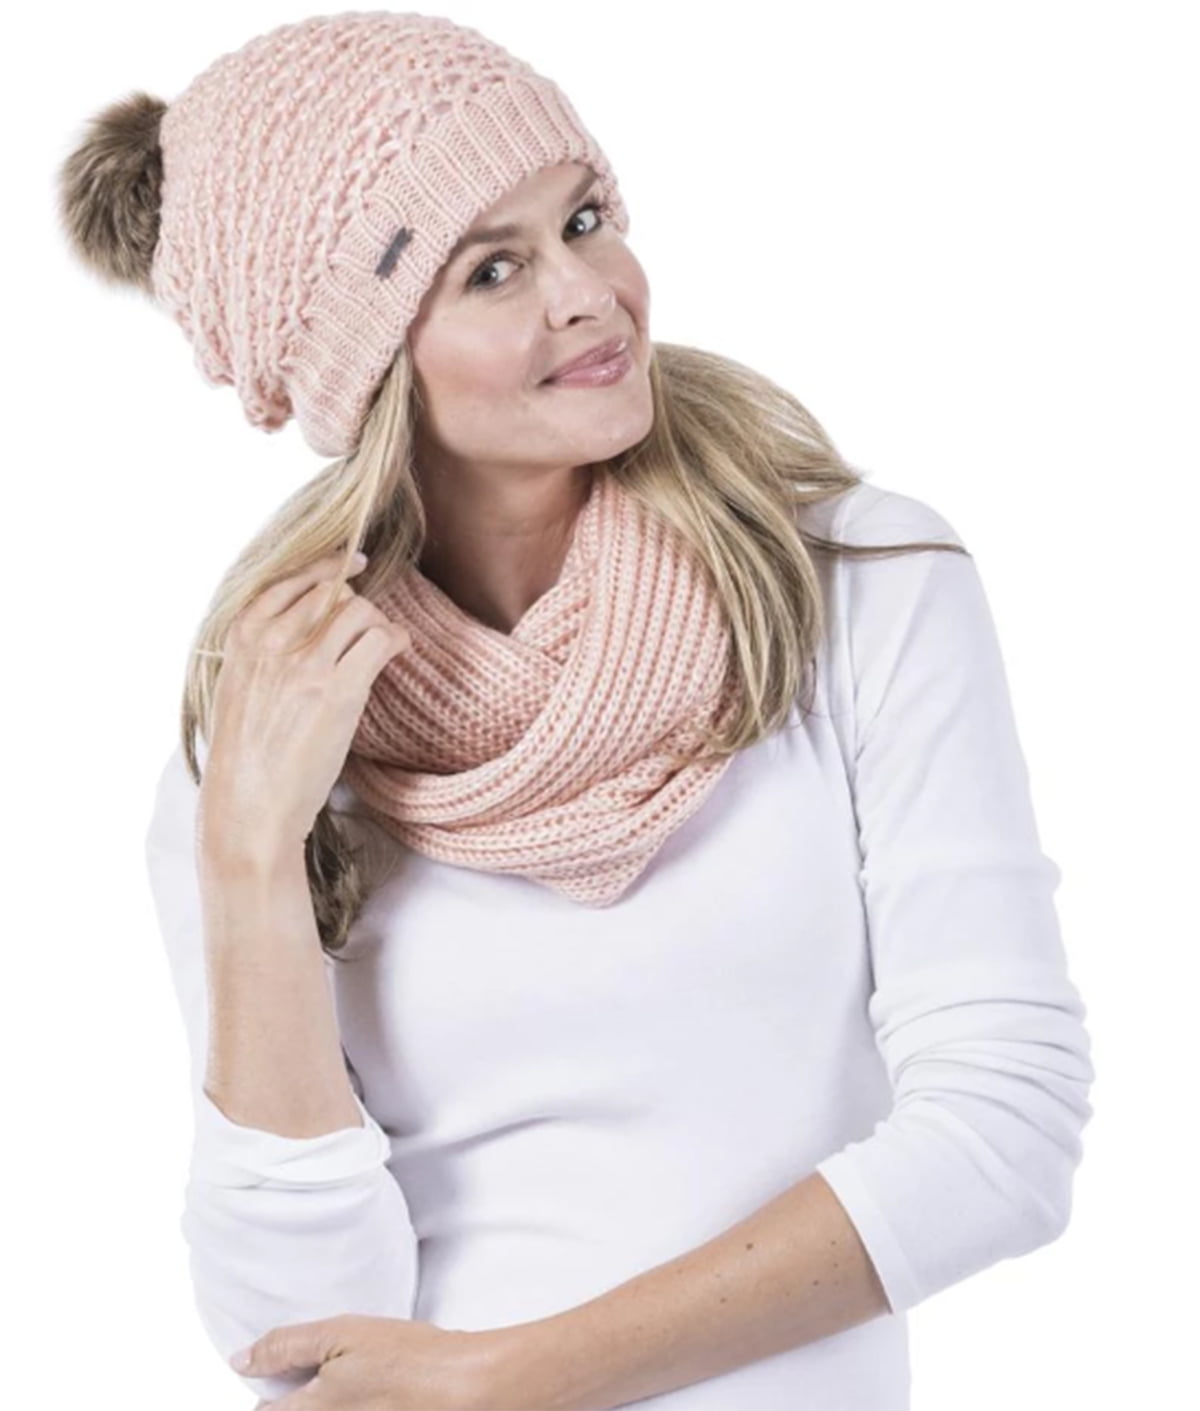 Knitted Mohair Hat with Pom Pom Off-White with Sparkle!